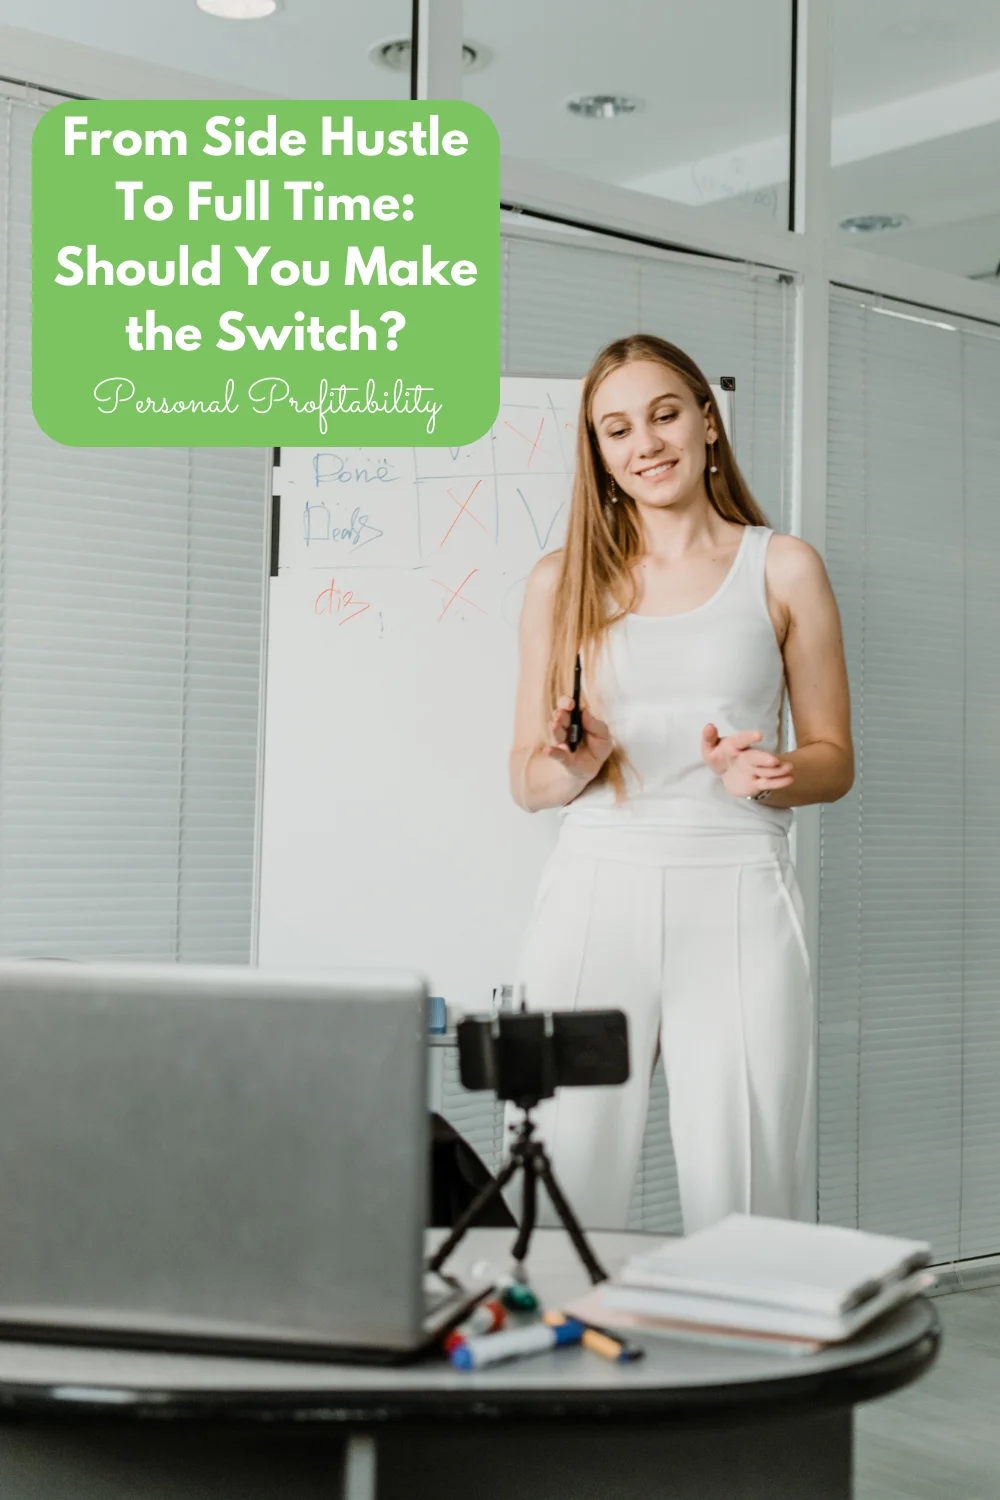 From Side Hustle To Full Time: Should You Make the Switch?